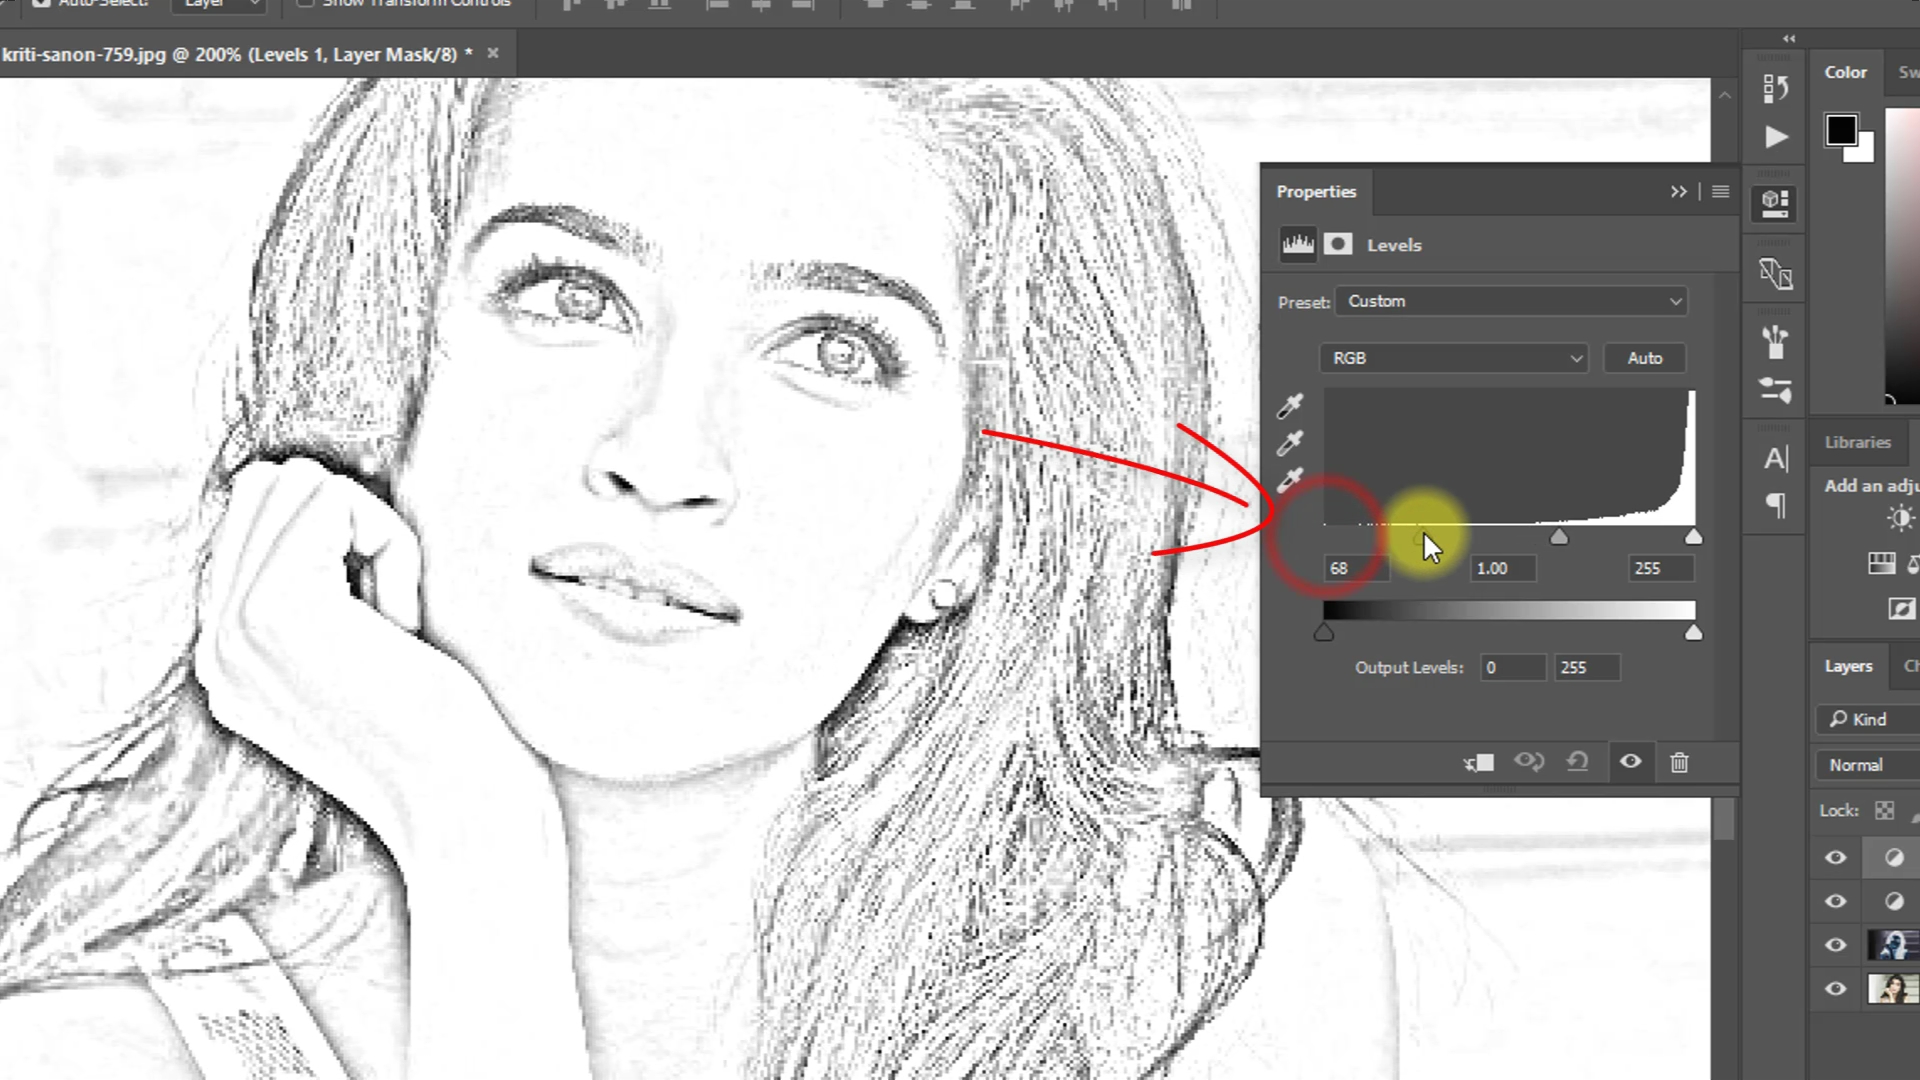 How to Convert Image into Pencil Sketch in Photoshop CC